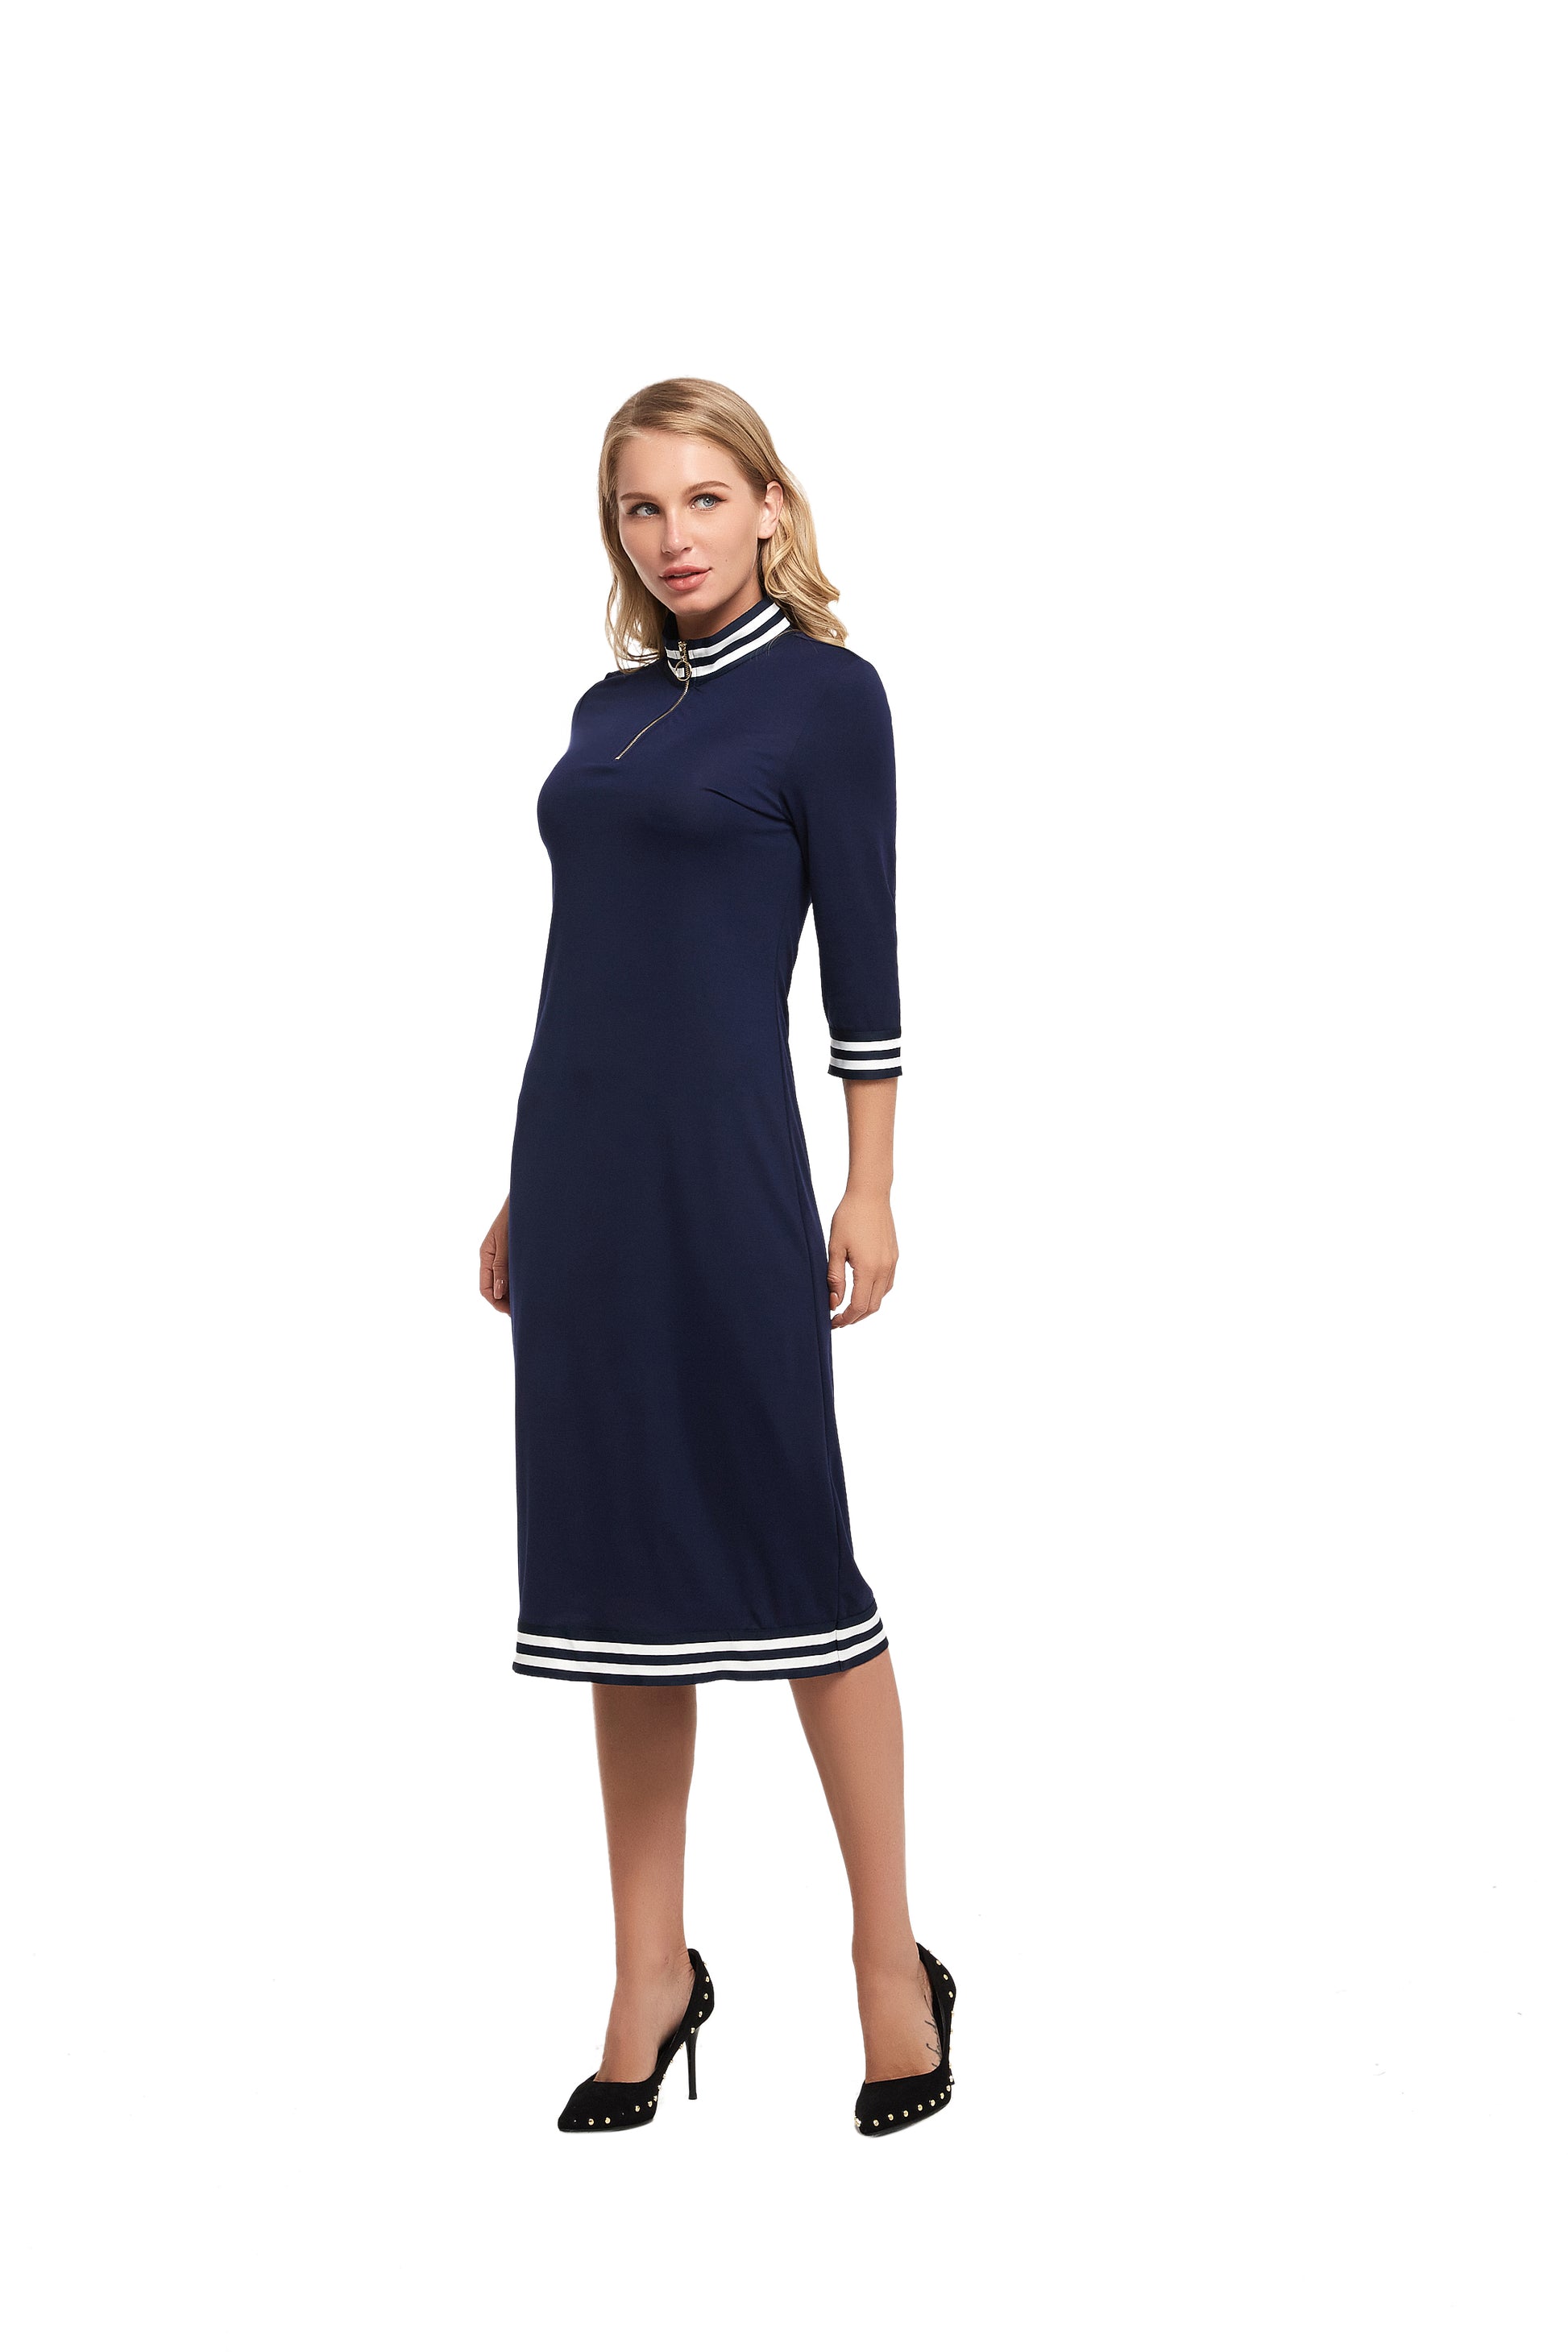 Modest Dress with 3/4 Sleeve and Striped Band Detail - seilerlanguageservices